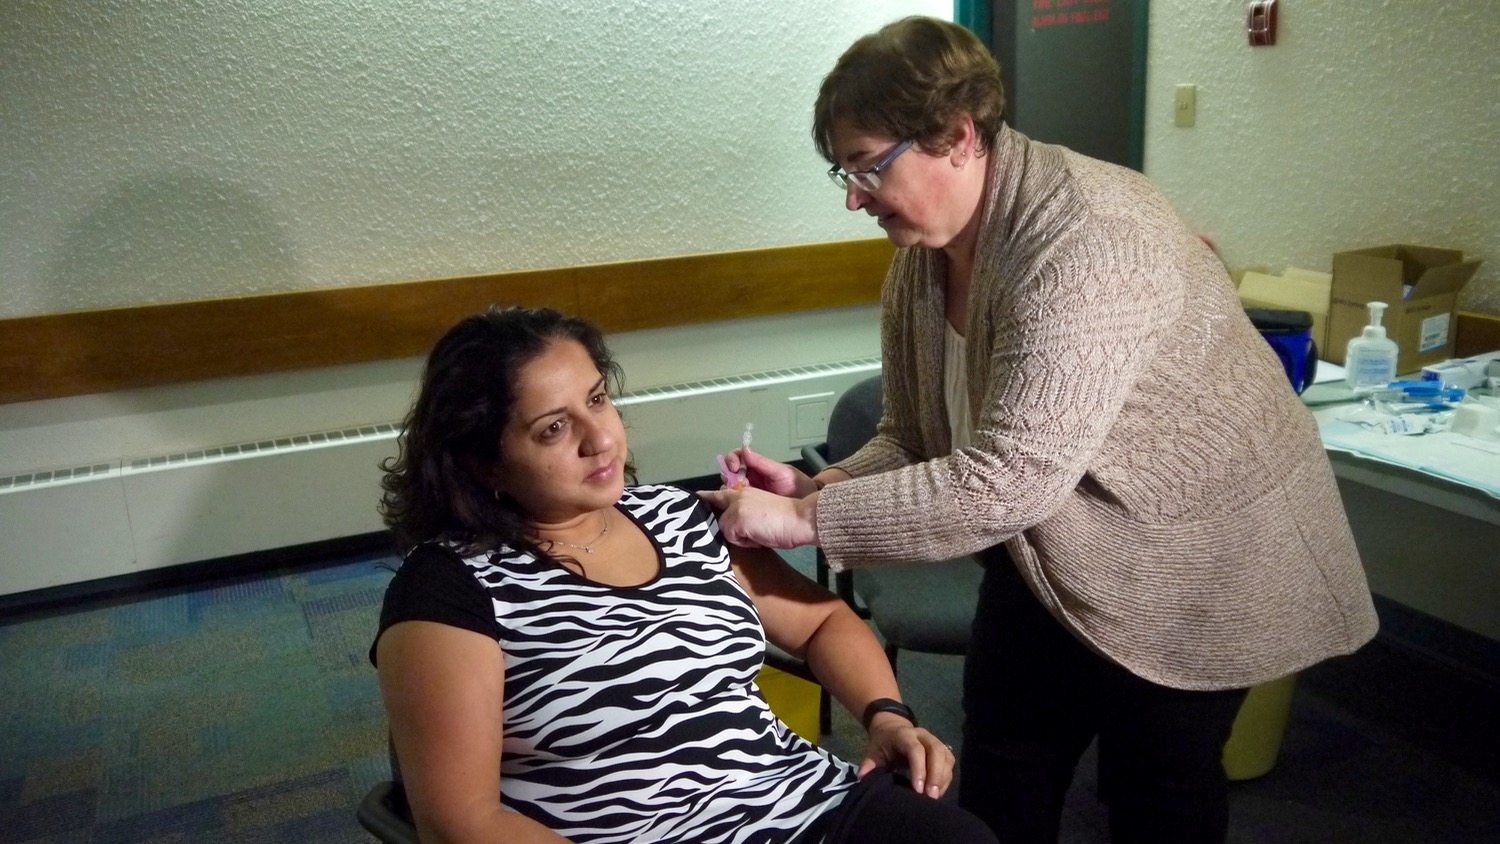 CPHO says get your flu shot to fight COVID-19